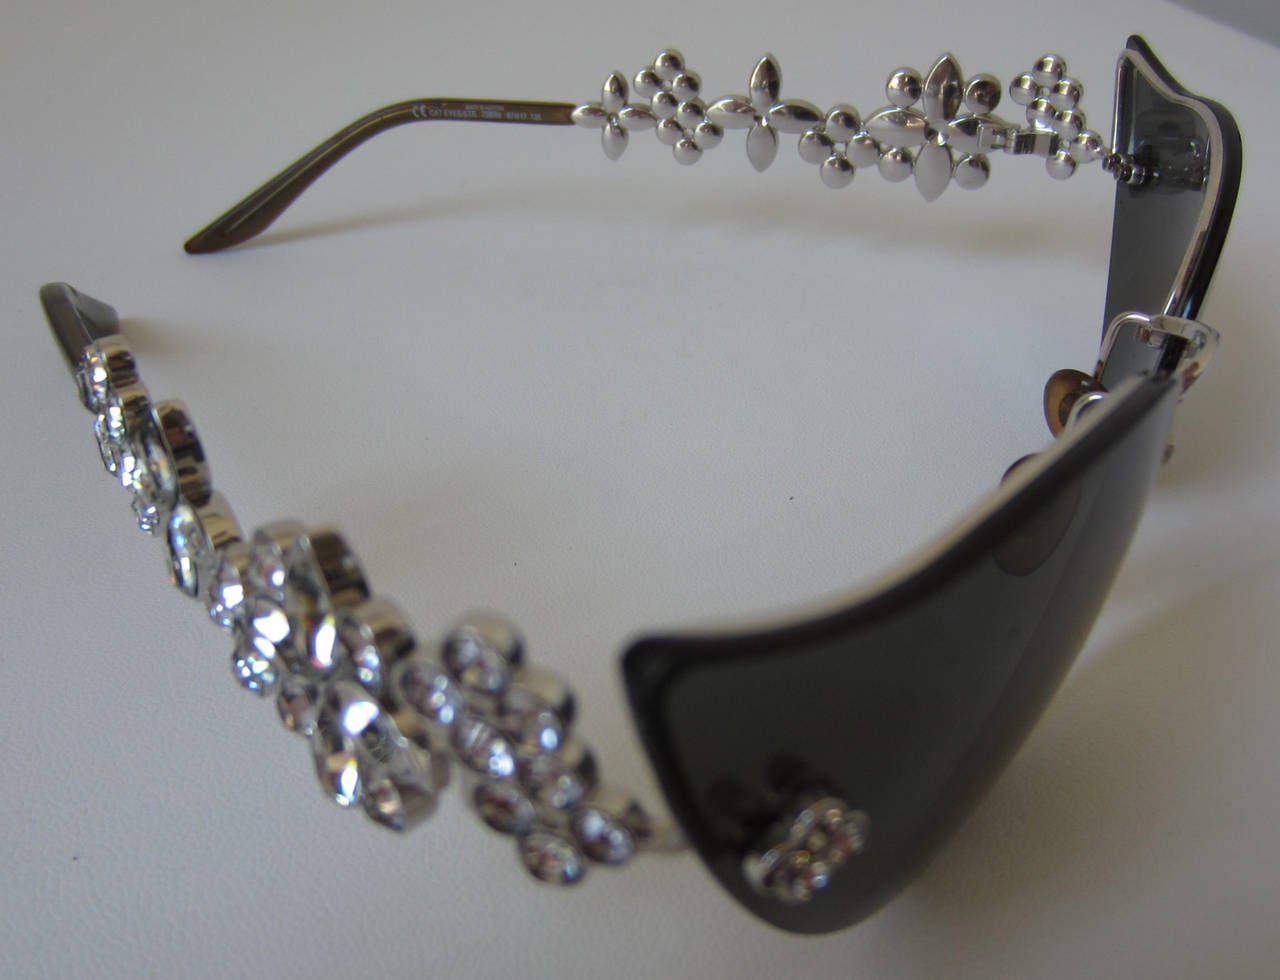 This is an authentic pair of Louis Vuitton Crystal Fleur Cat Eye sunglasses nr. 501 of 1000 produced world wide.
These stylish glasses have classic cat eye rims with lenses that are a shade of silver.
The arms have all the Louis Vuitton monogram